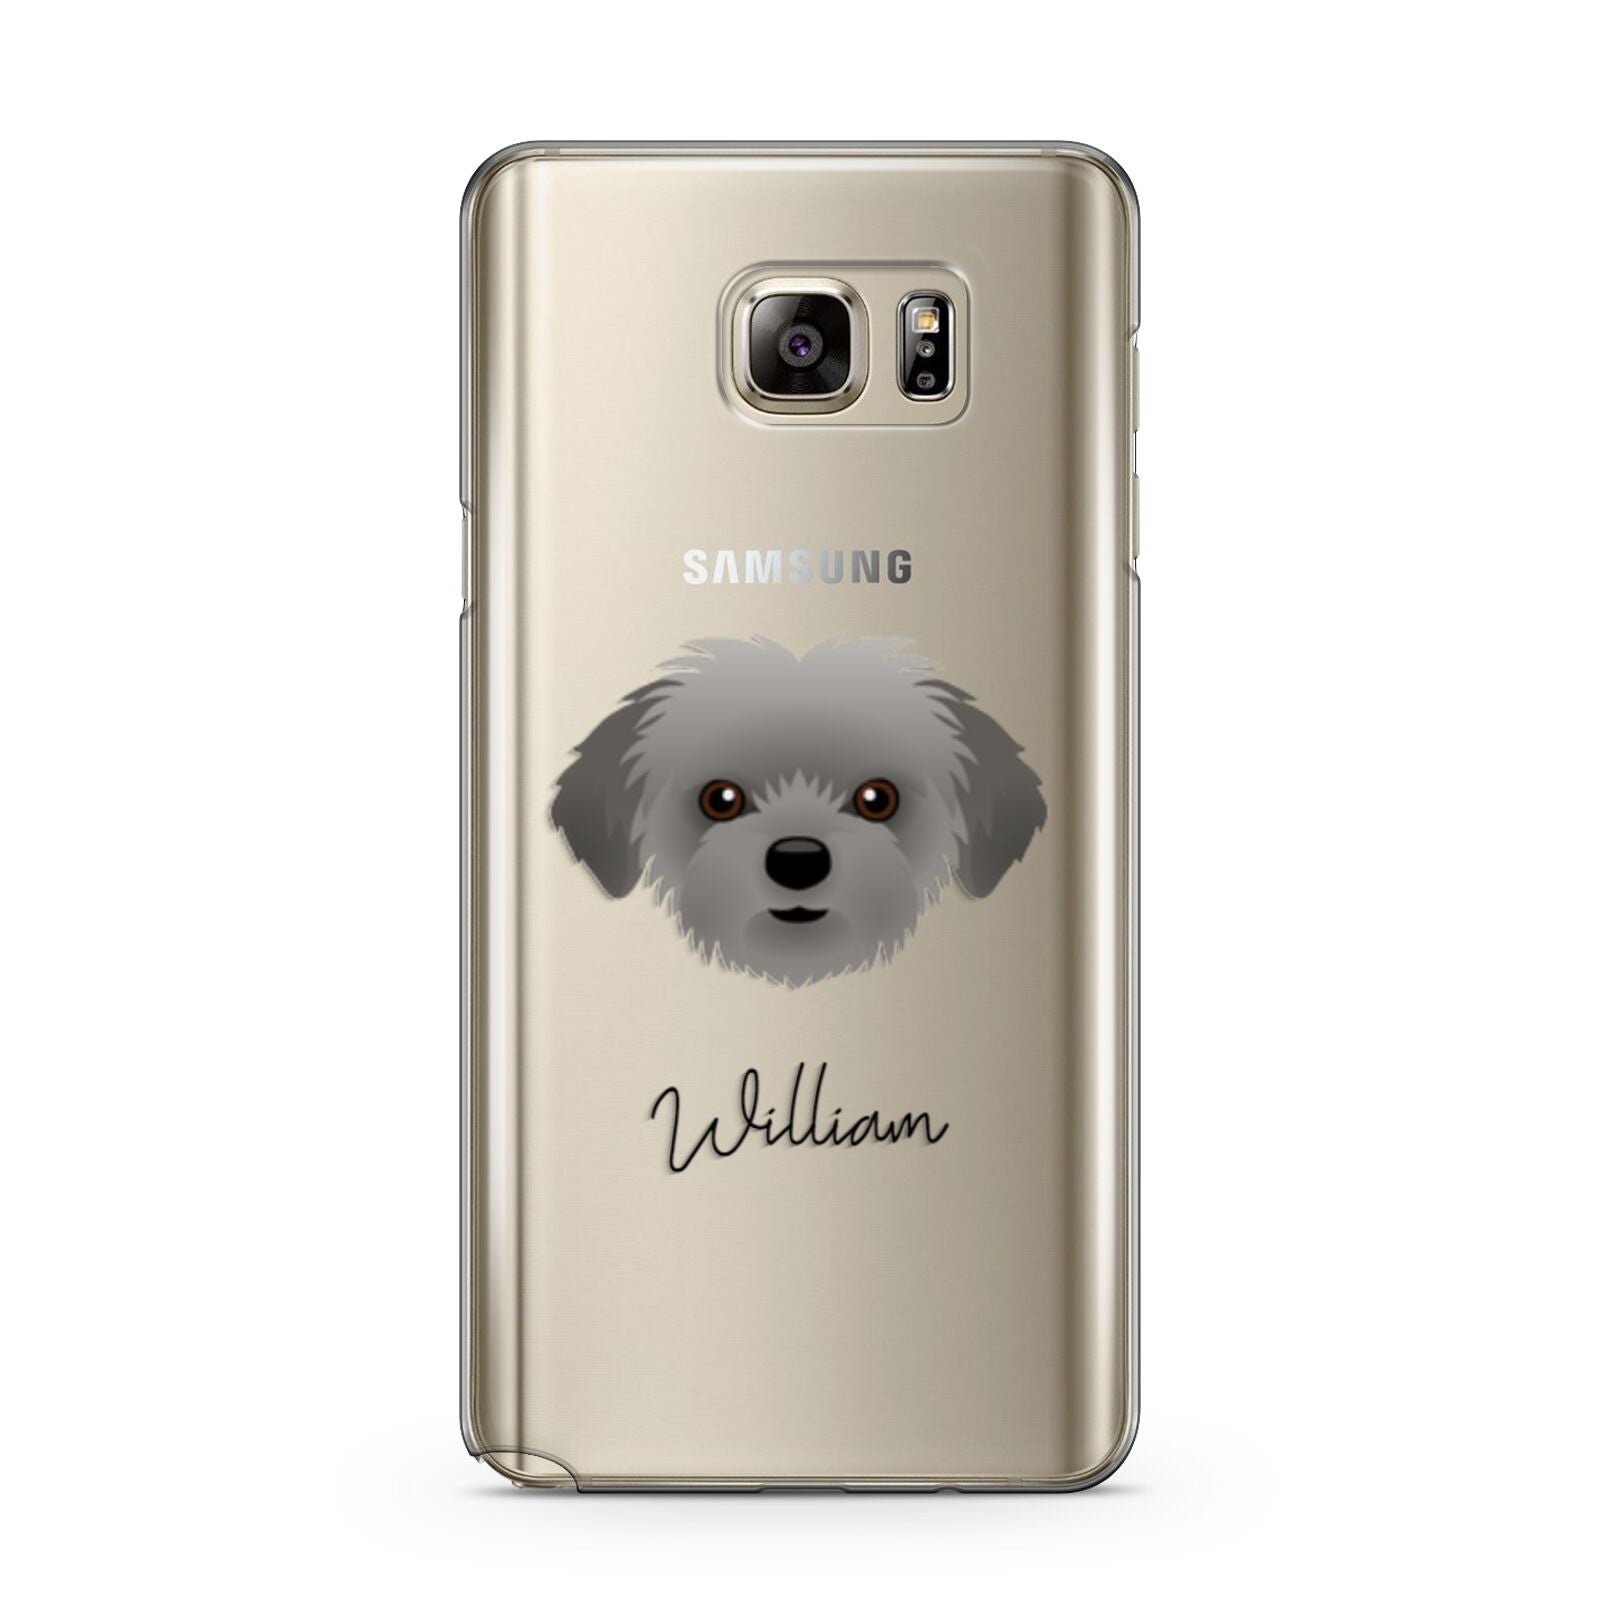 Shorkie Personalised Samsung Galaxy Note 5 Case